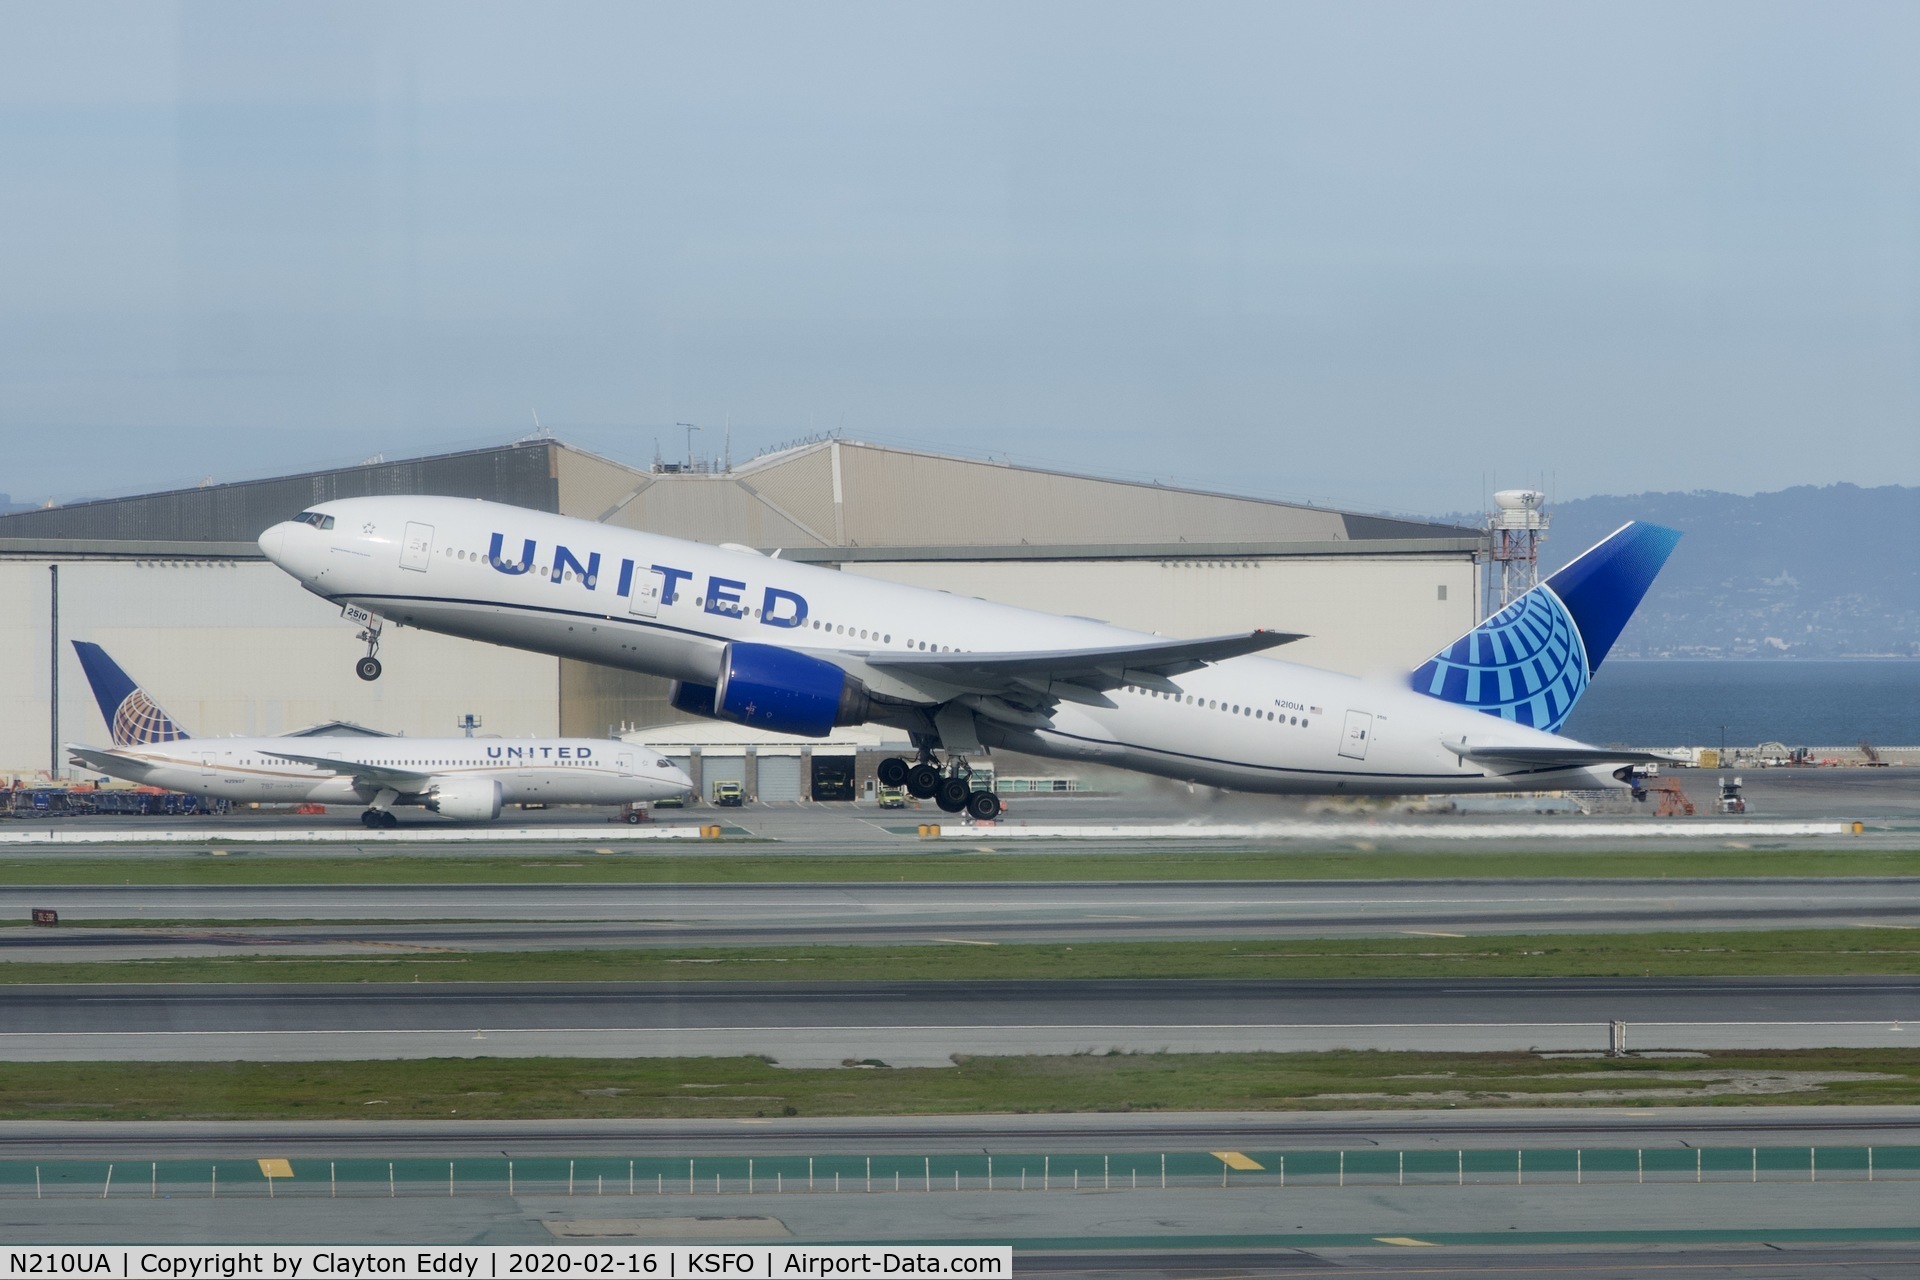 N210UA, 2000 Boeing 777-222 C/N 30216, Picture taken from new observation deck terminal 2. SFO. 2020.